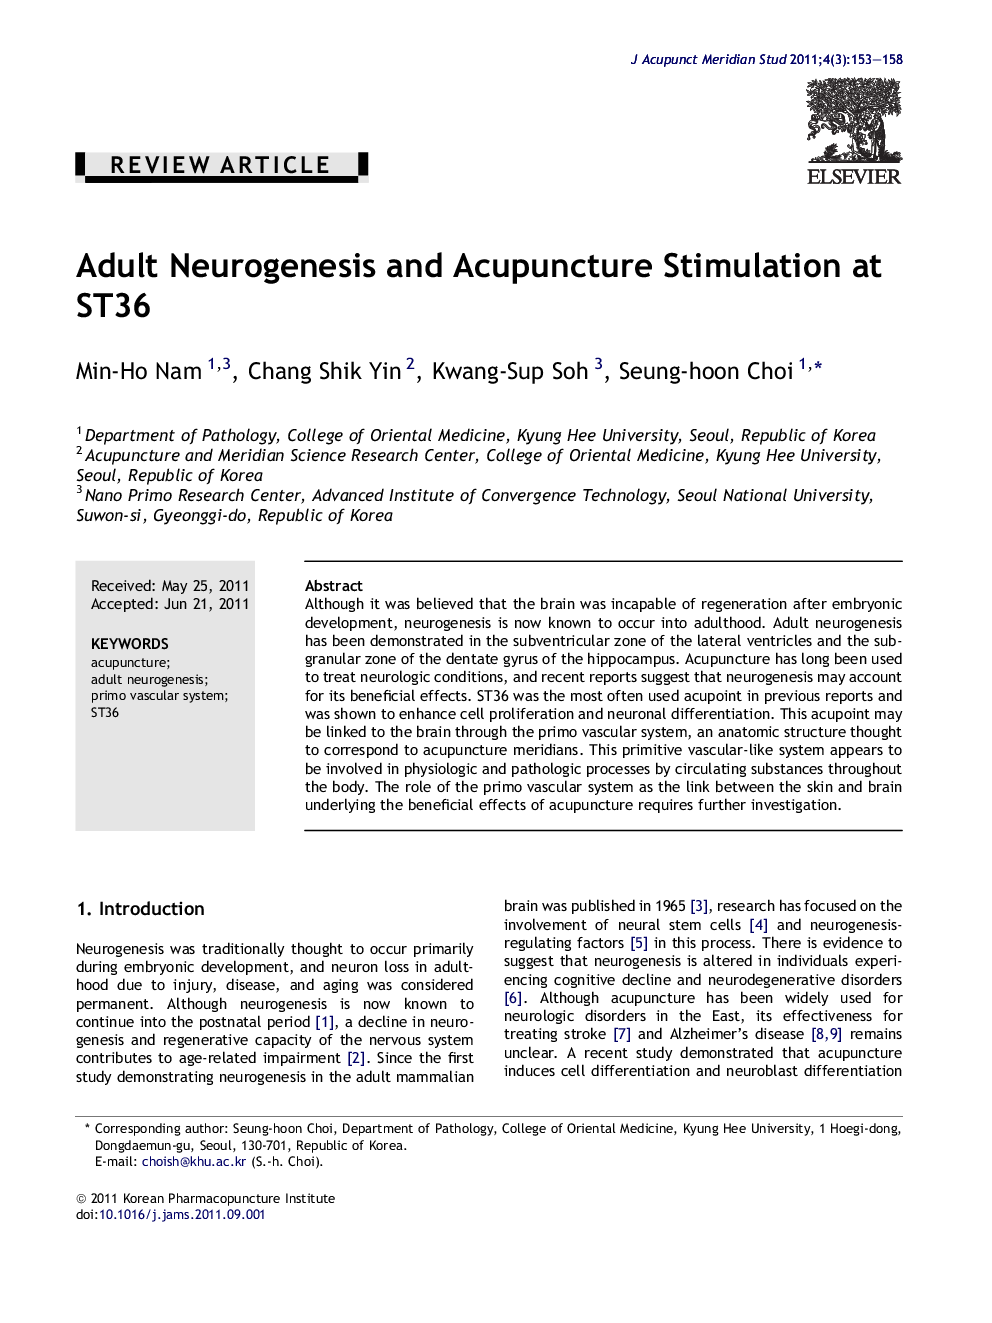 Adult Neurogenesis and Acupuncture Stimulation at ST36